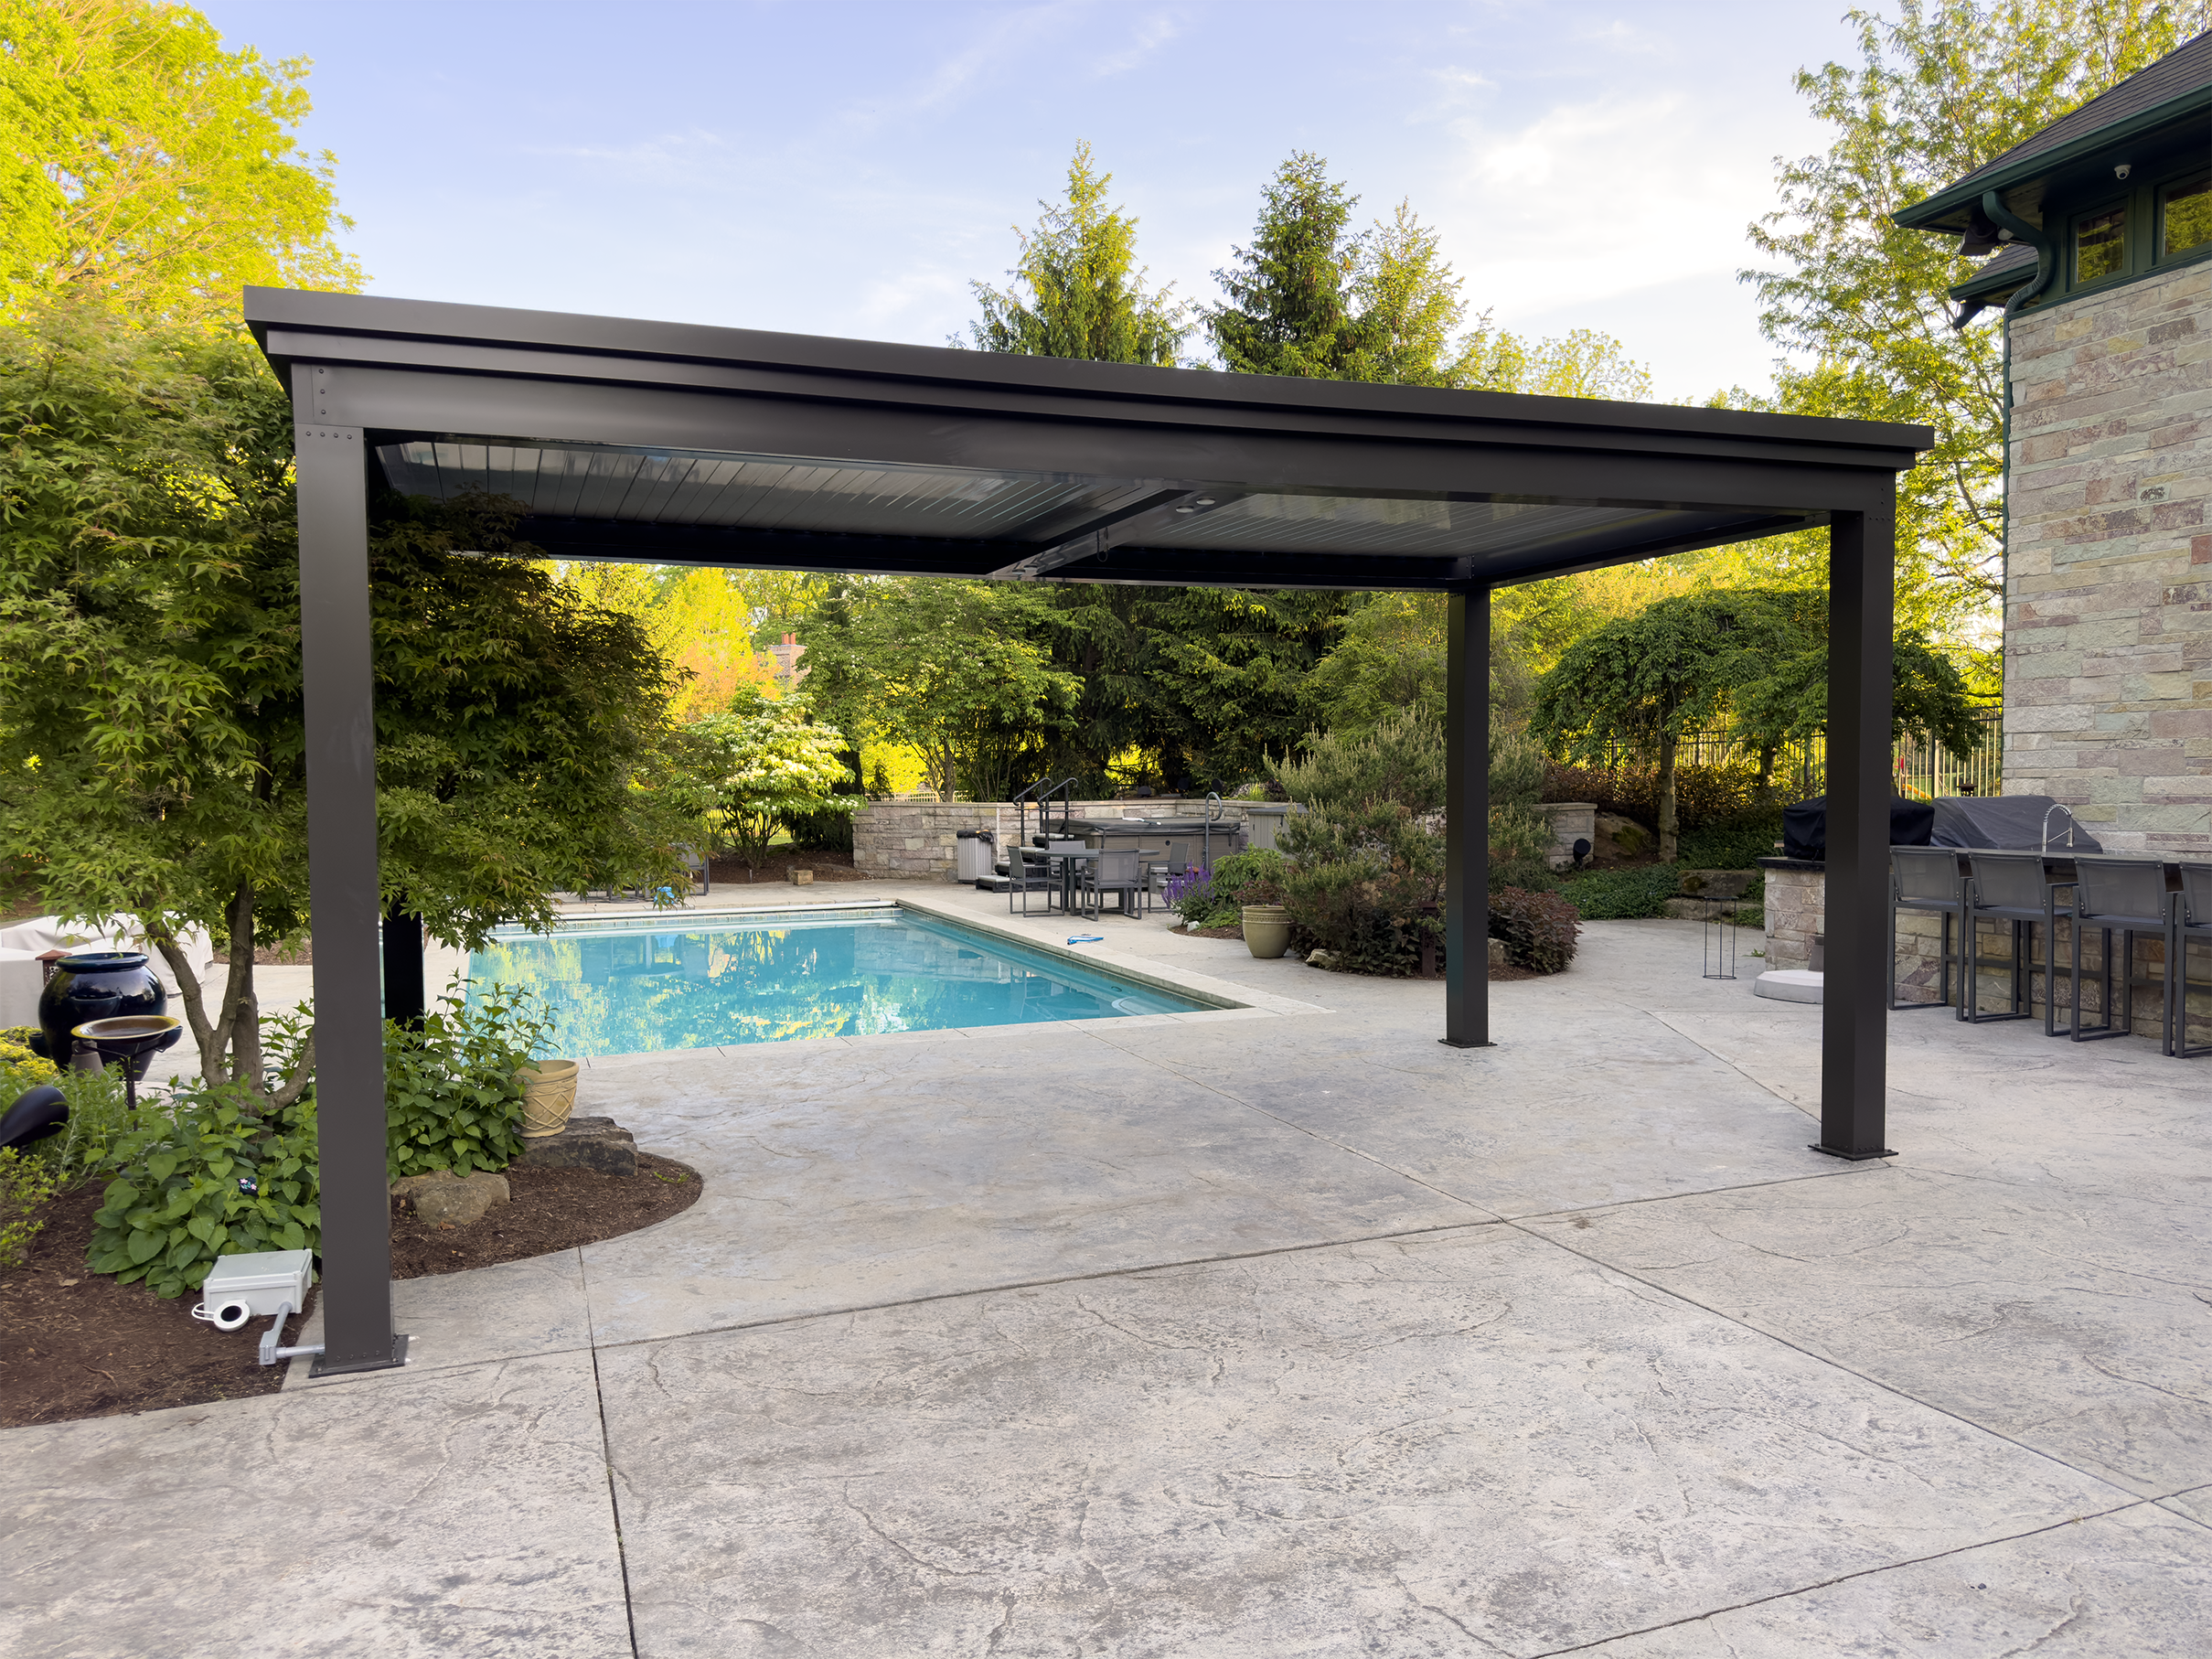 Aluminum is best material for a pergola structure. Deck or patio, with or without screens.